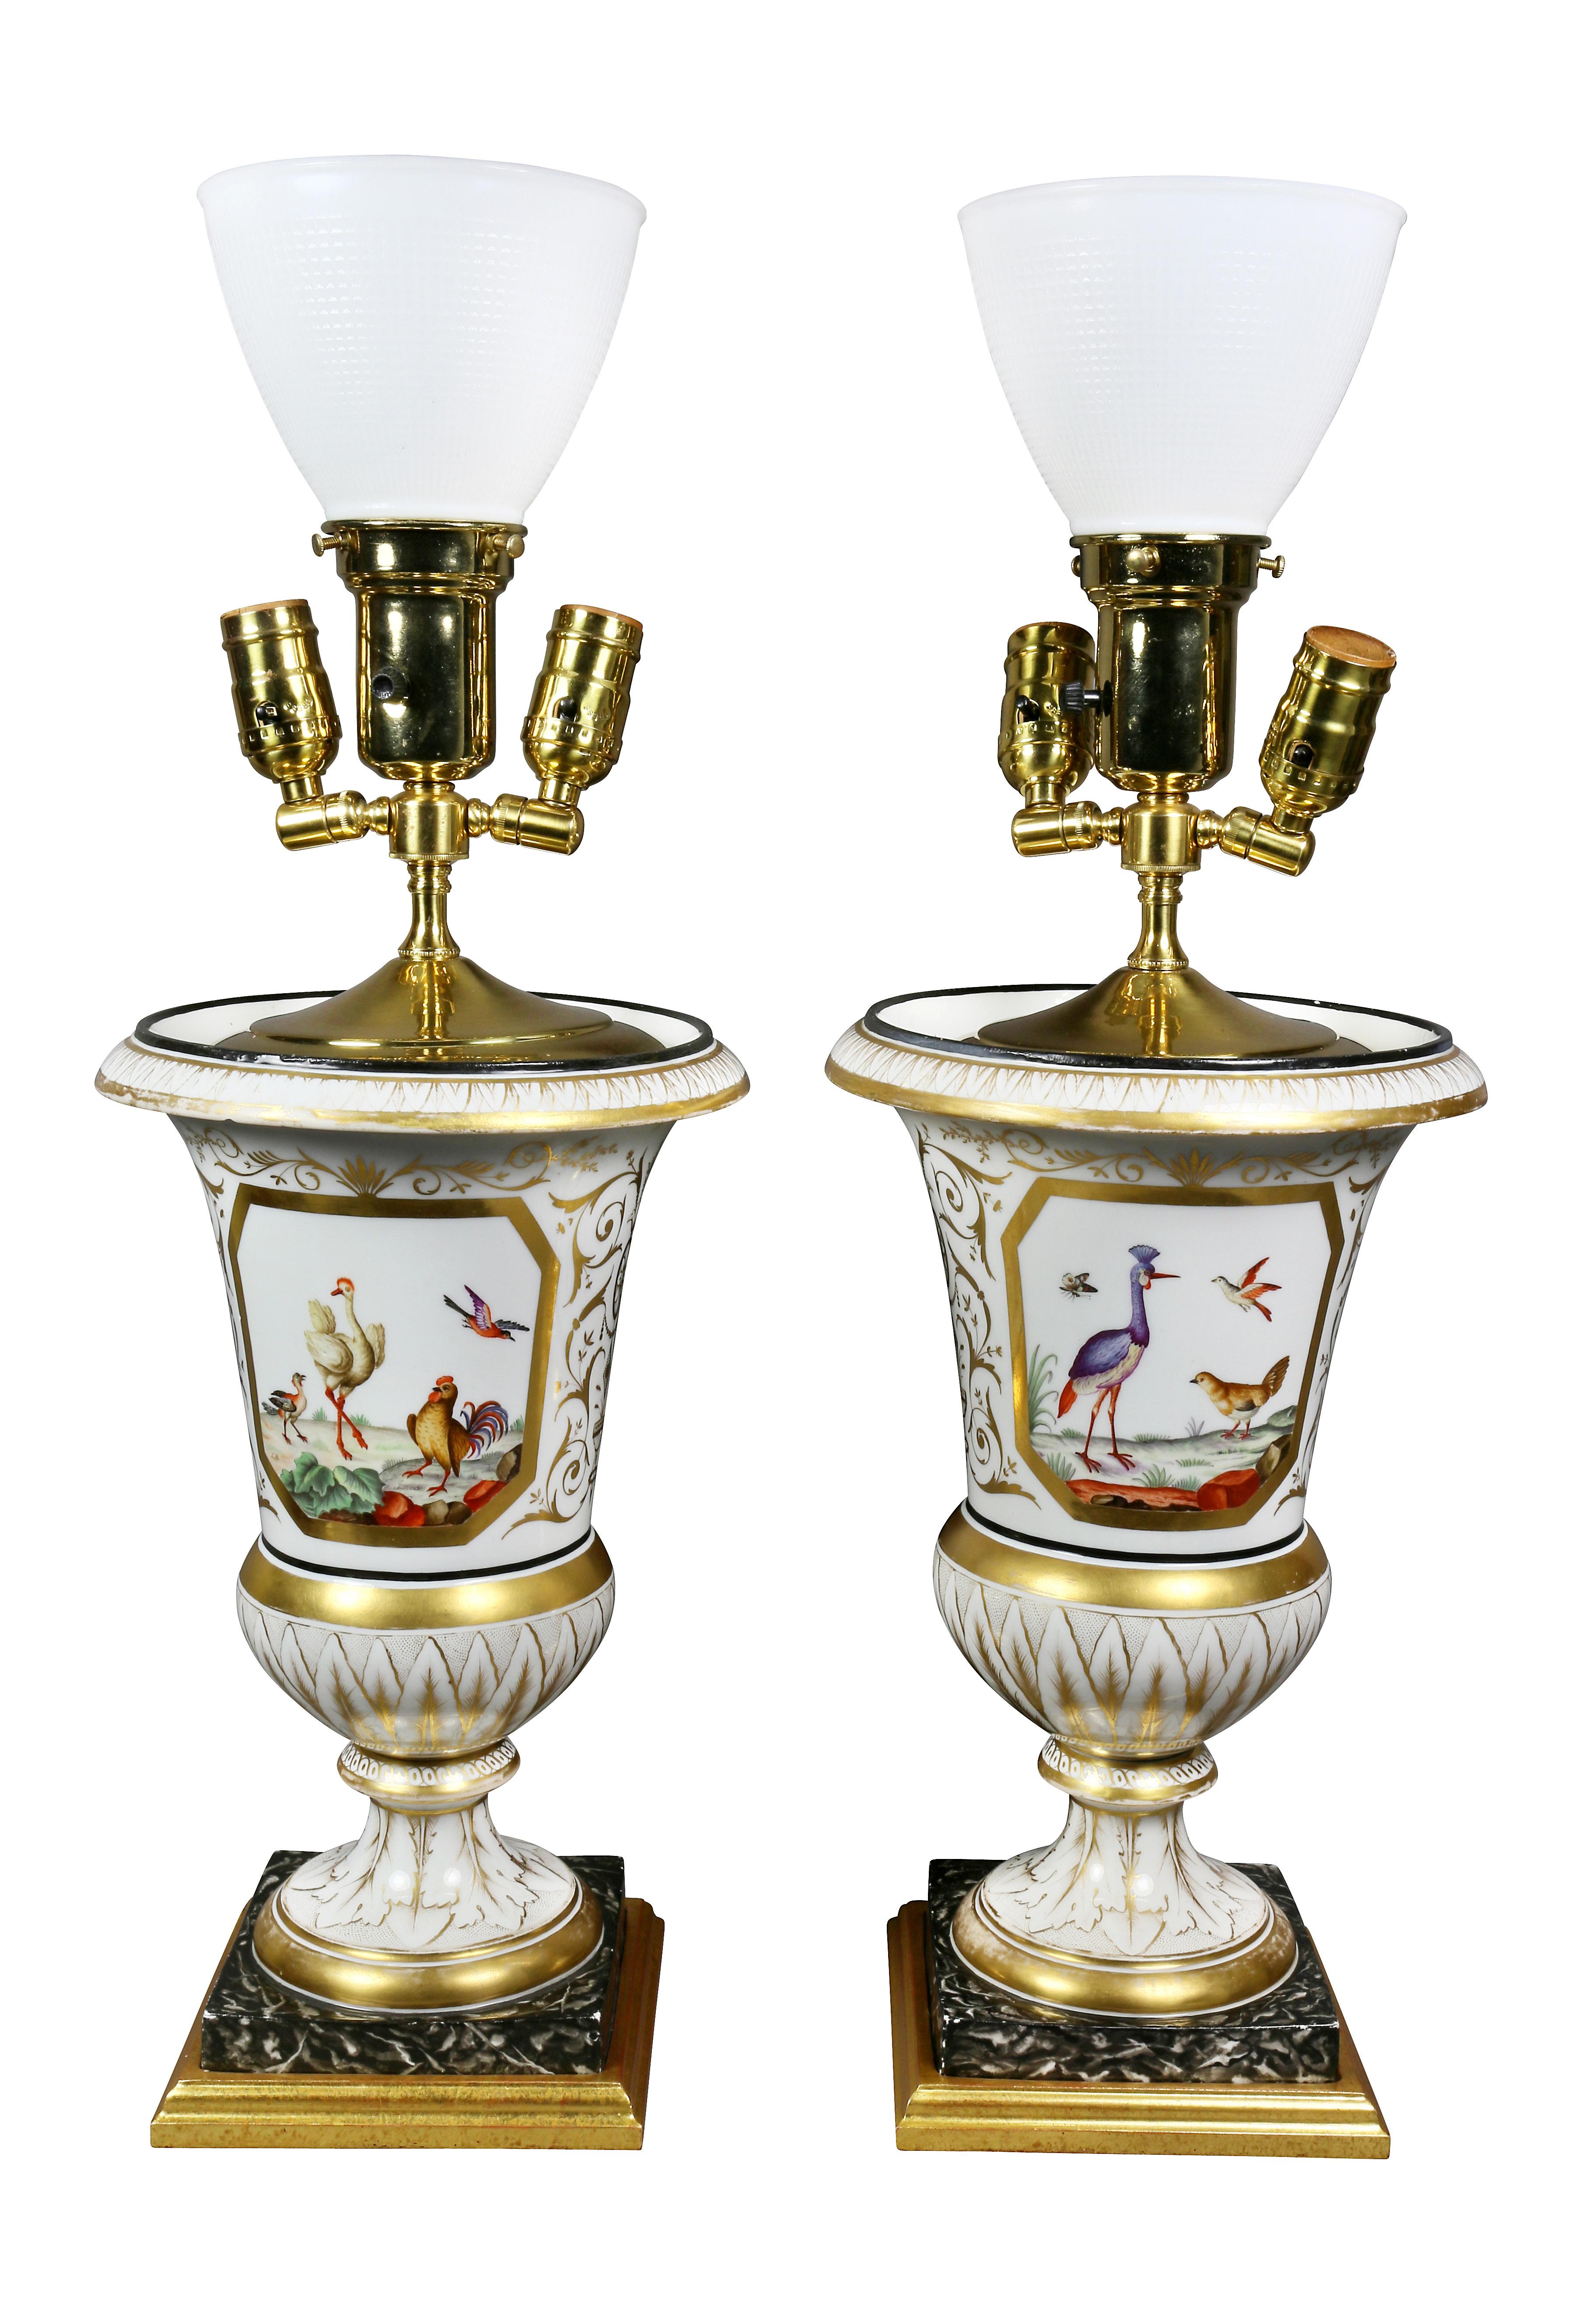 Vases later converted to lamps beautifully painted with a fruit cornucopia on one side and exotic birds on the other. Faux marble socle set in a giltwood base.